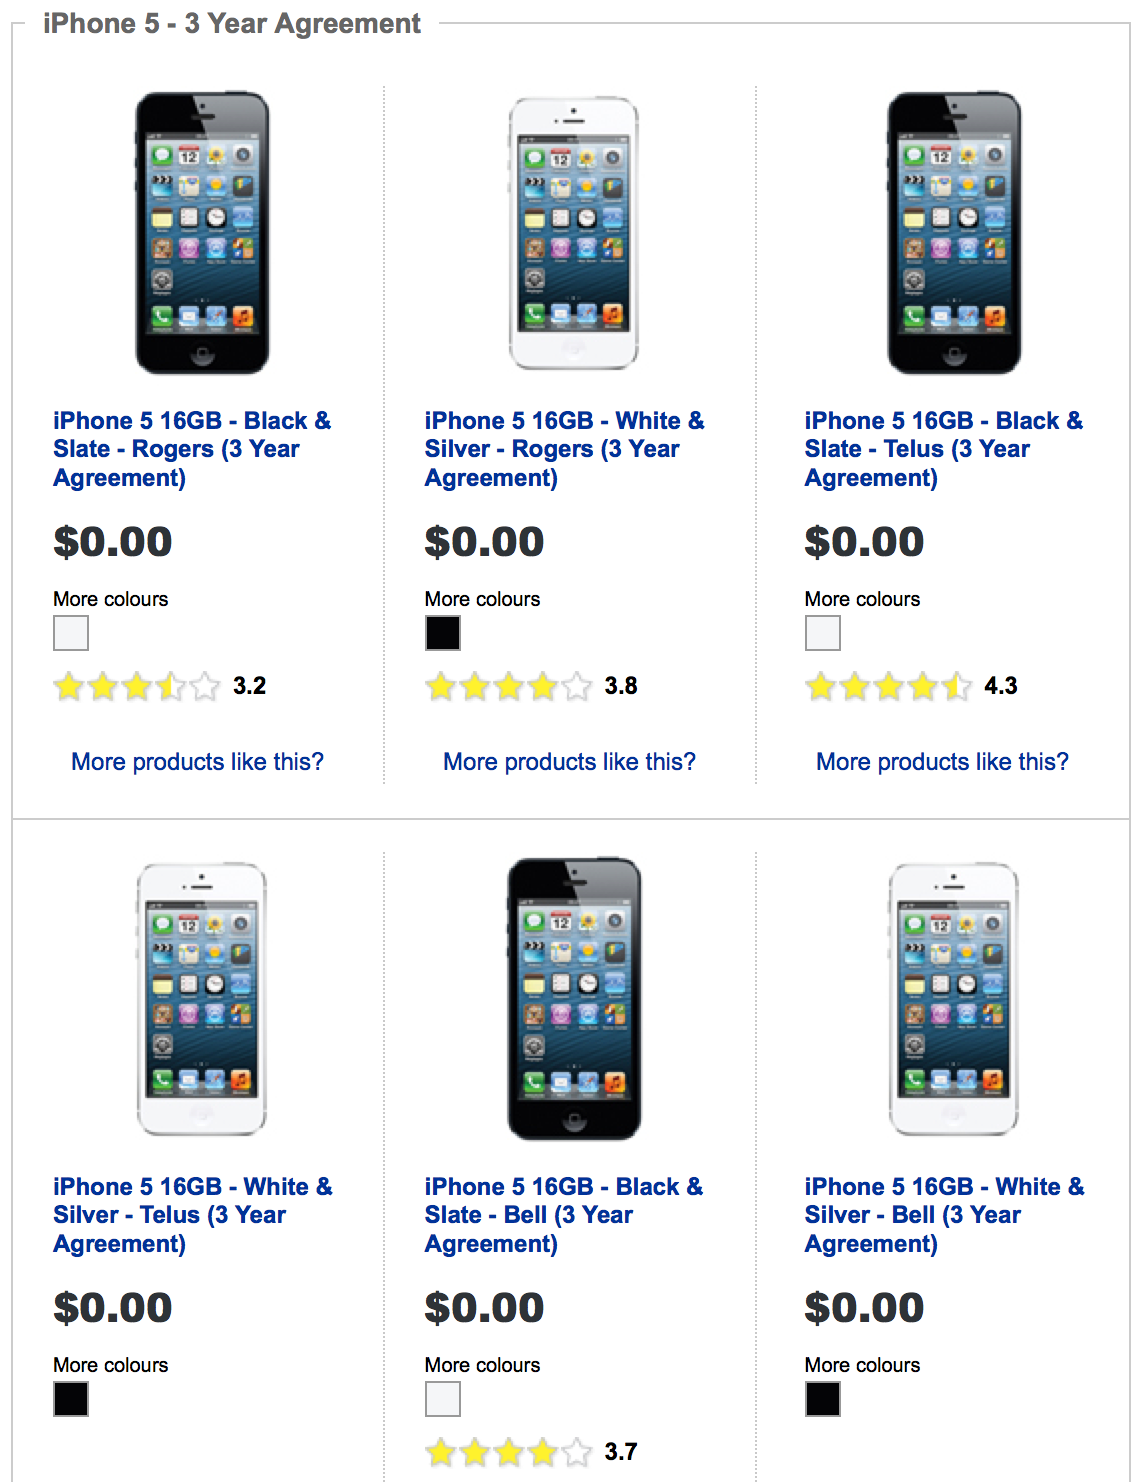 Best Buy Canada Discounts iPhone 5 to $0 for Boxing Day